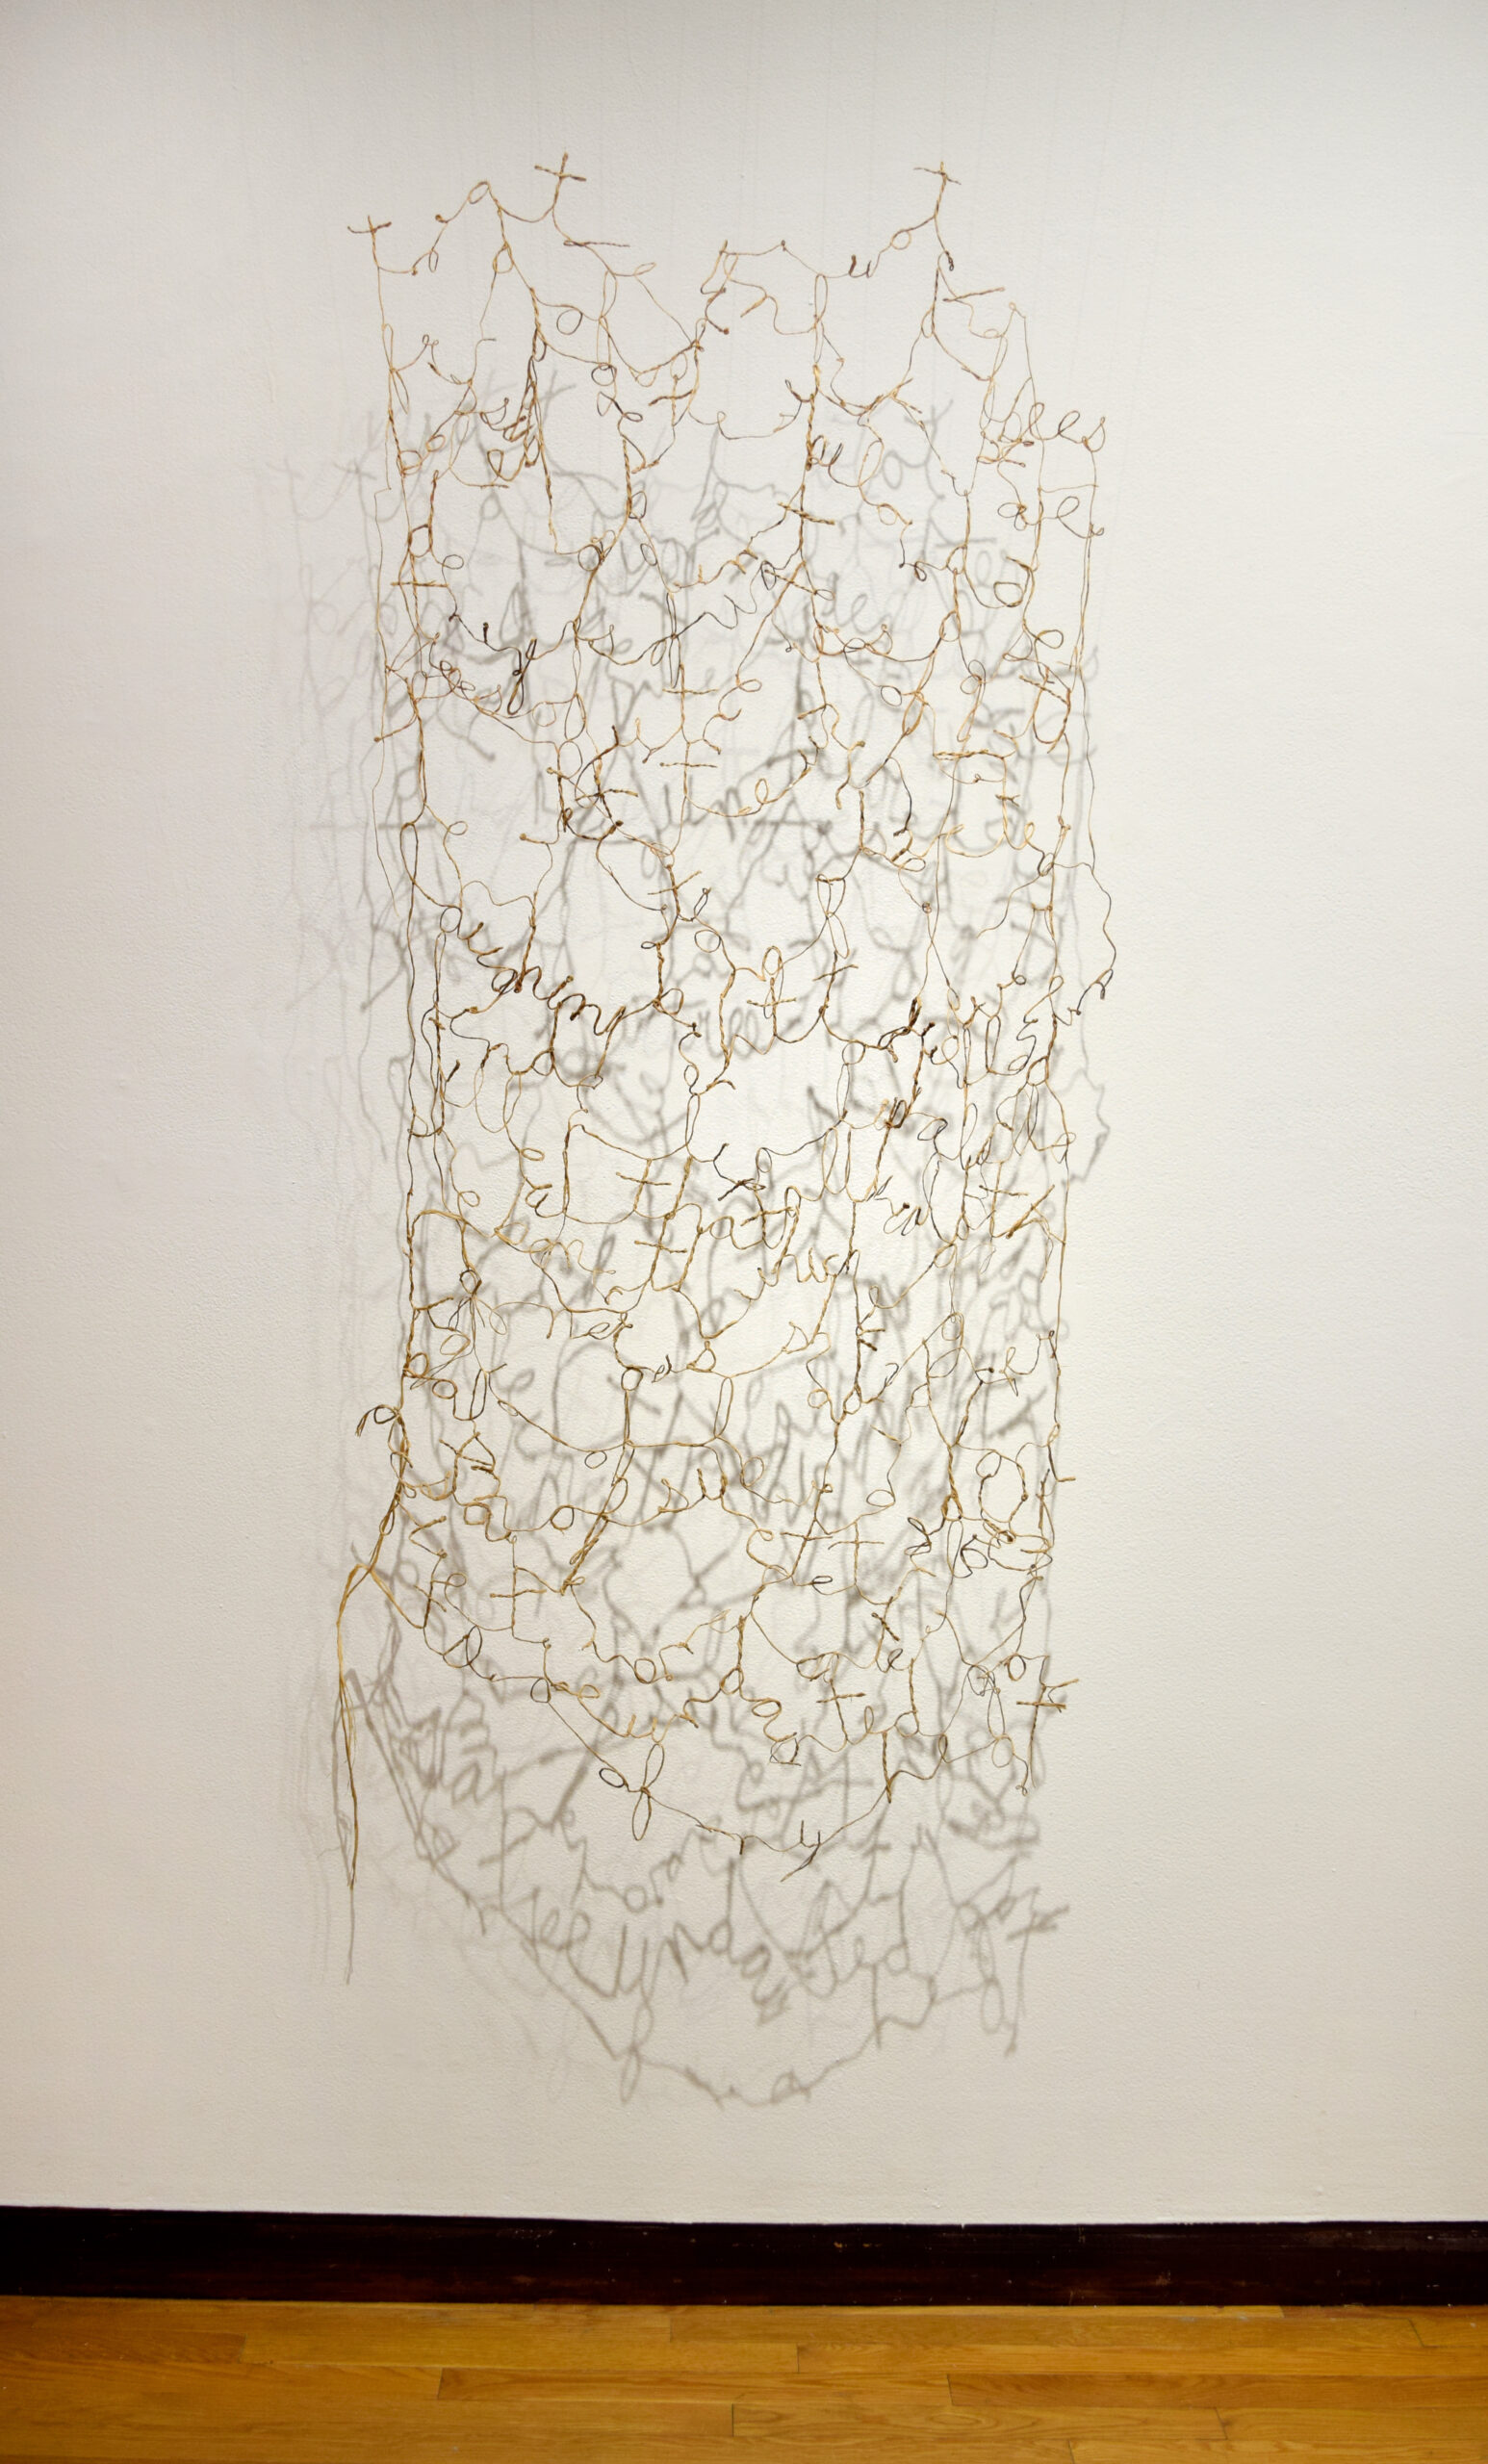 Listen Closely (Names of Basswood) 2022. Basswood fiber, string.  42” x 60” x 12”